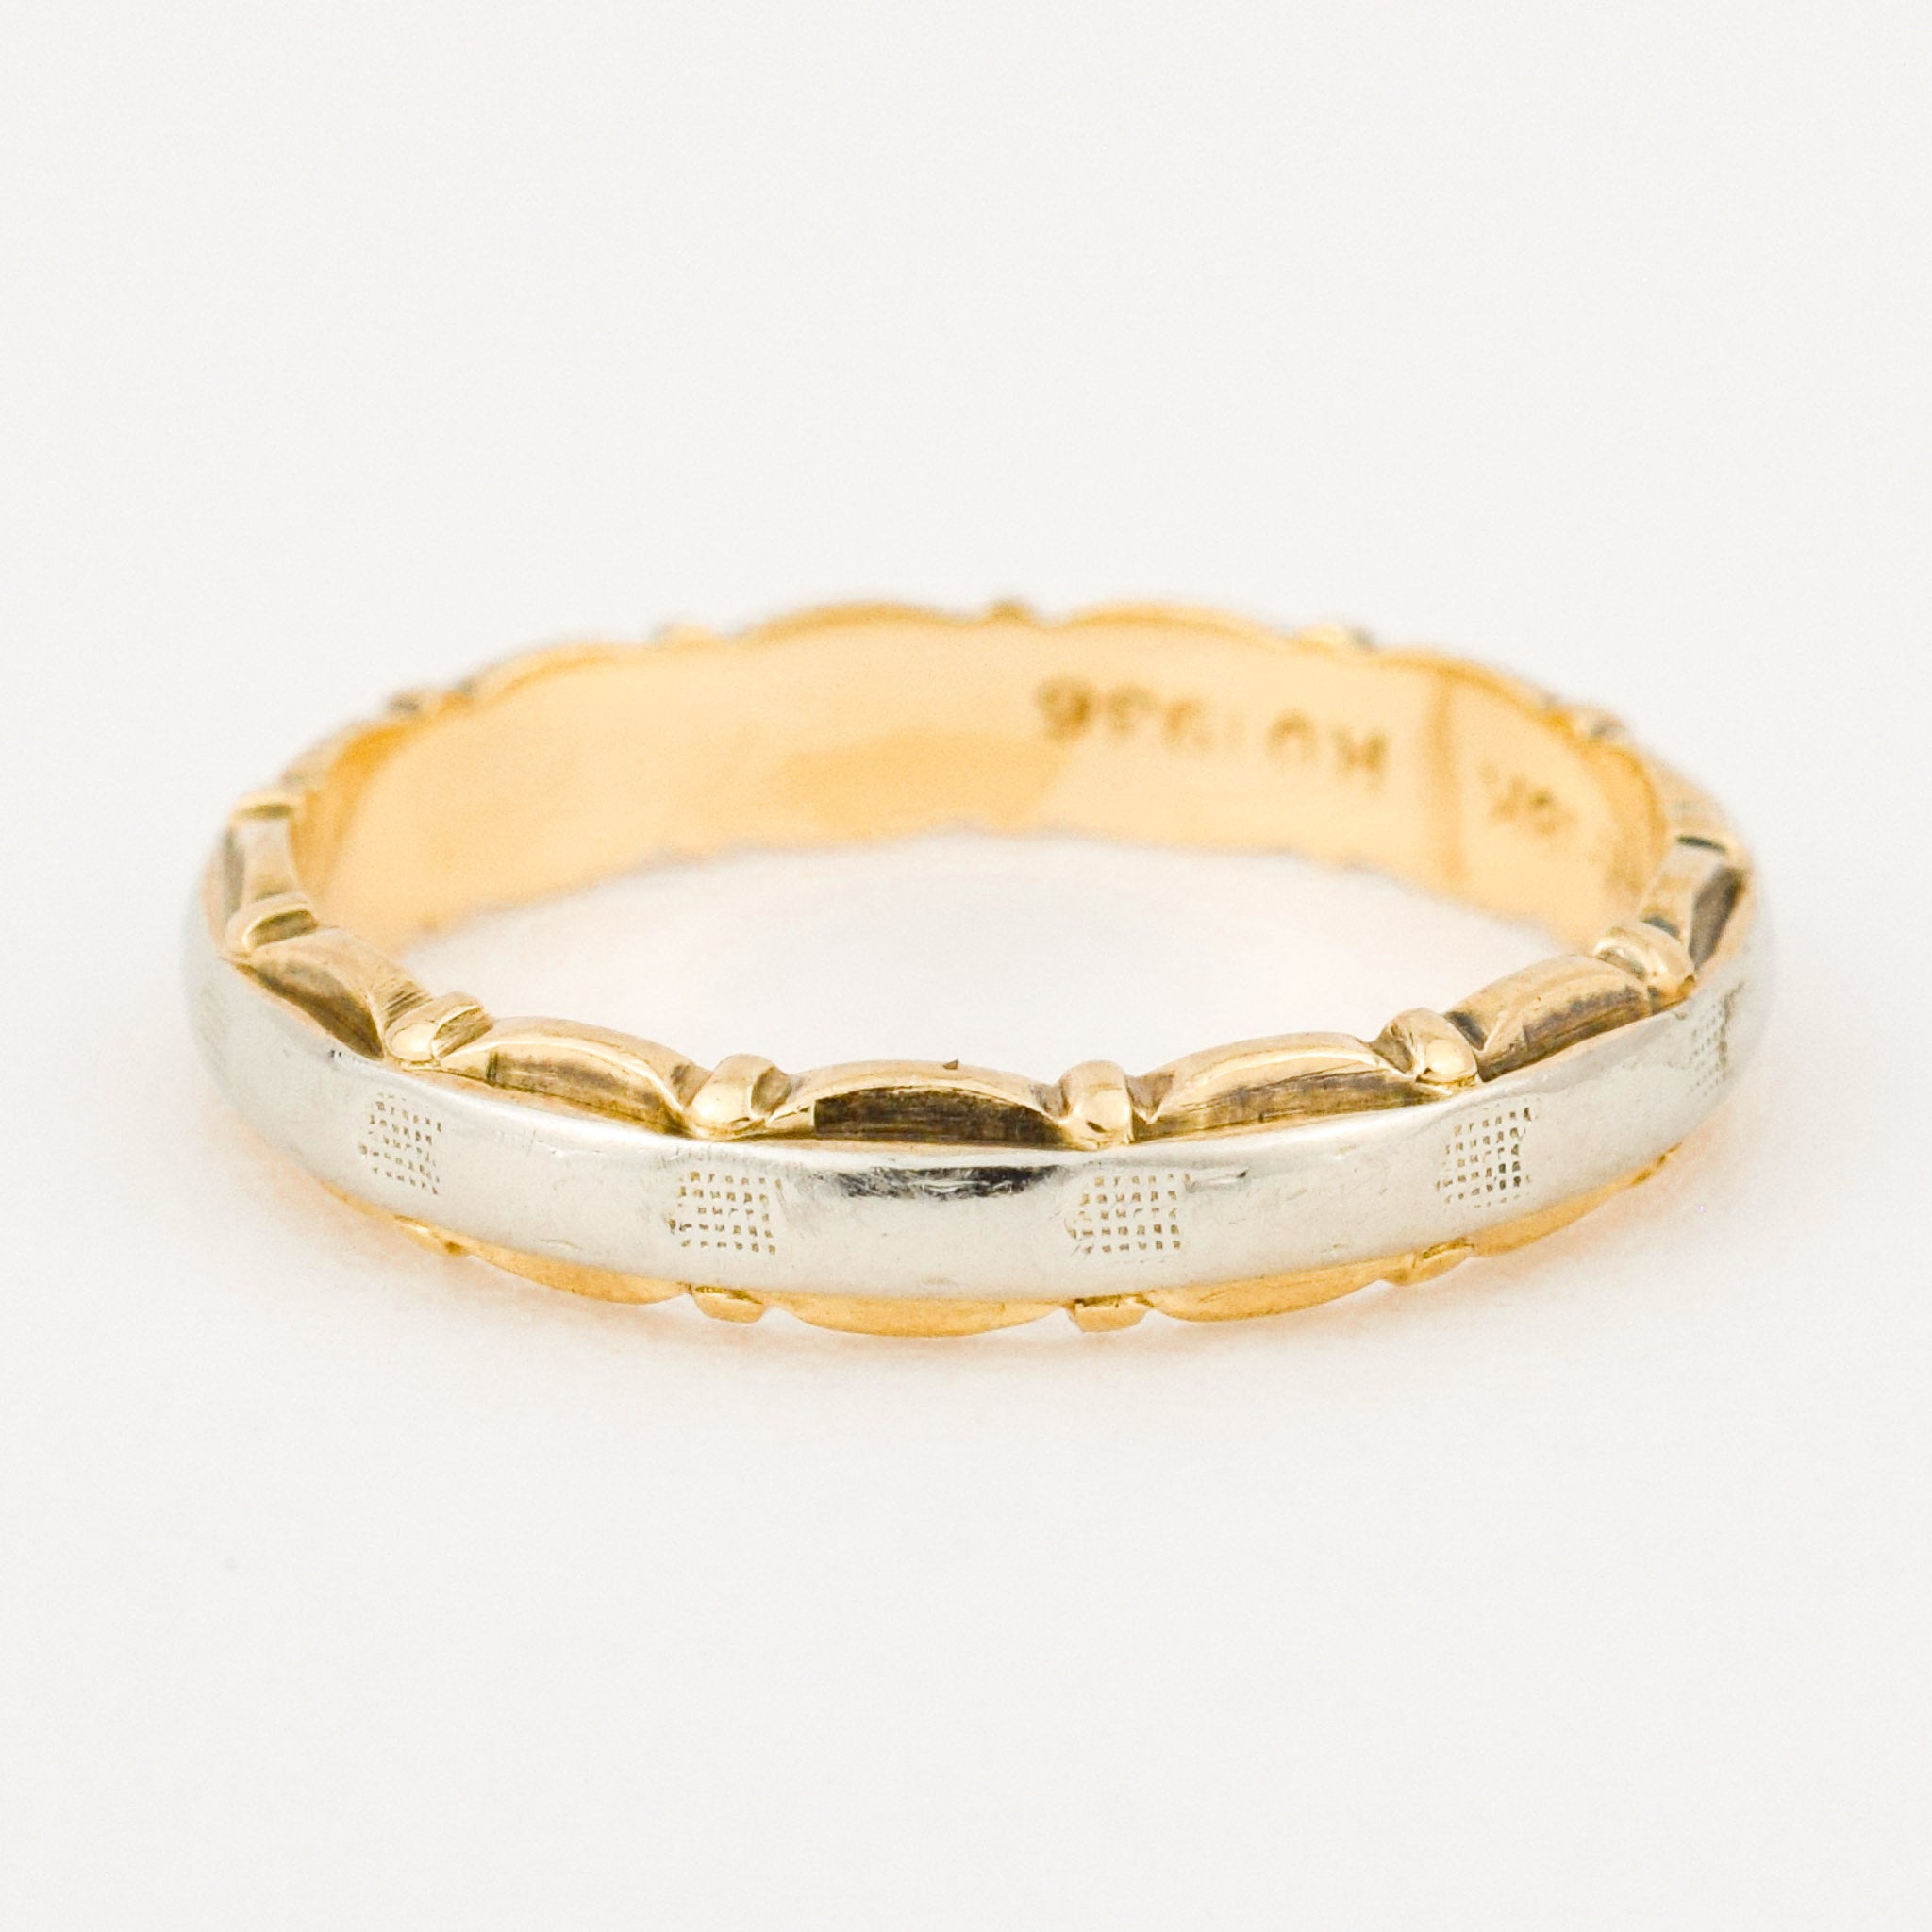 Two-toned Intricate Birk's gold wedding Band